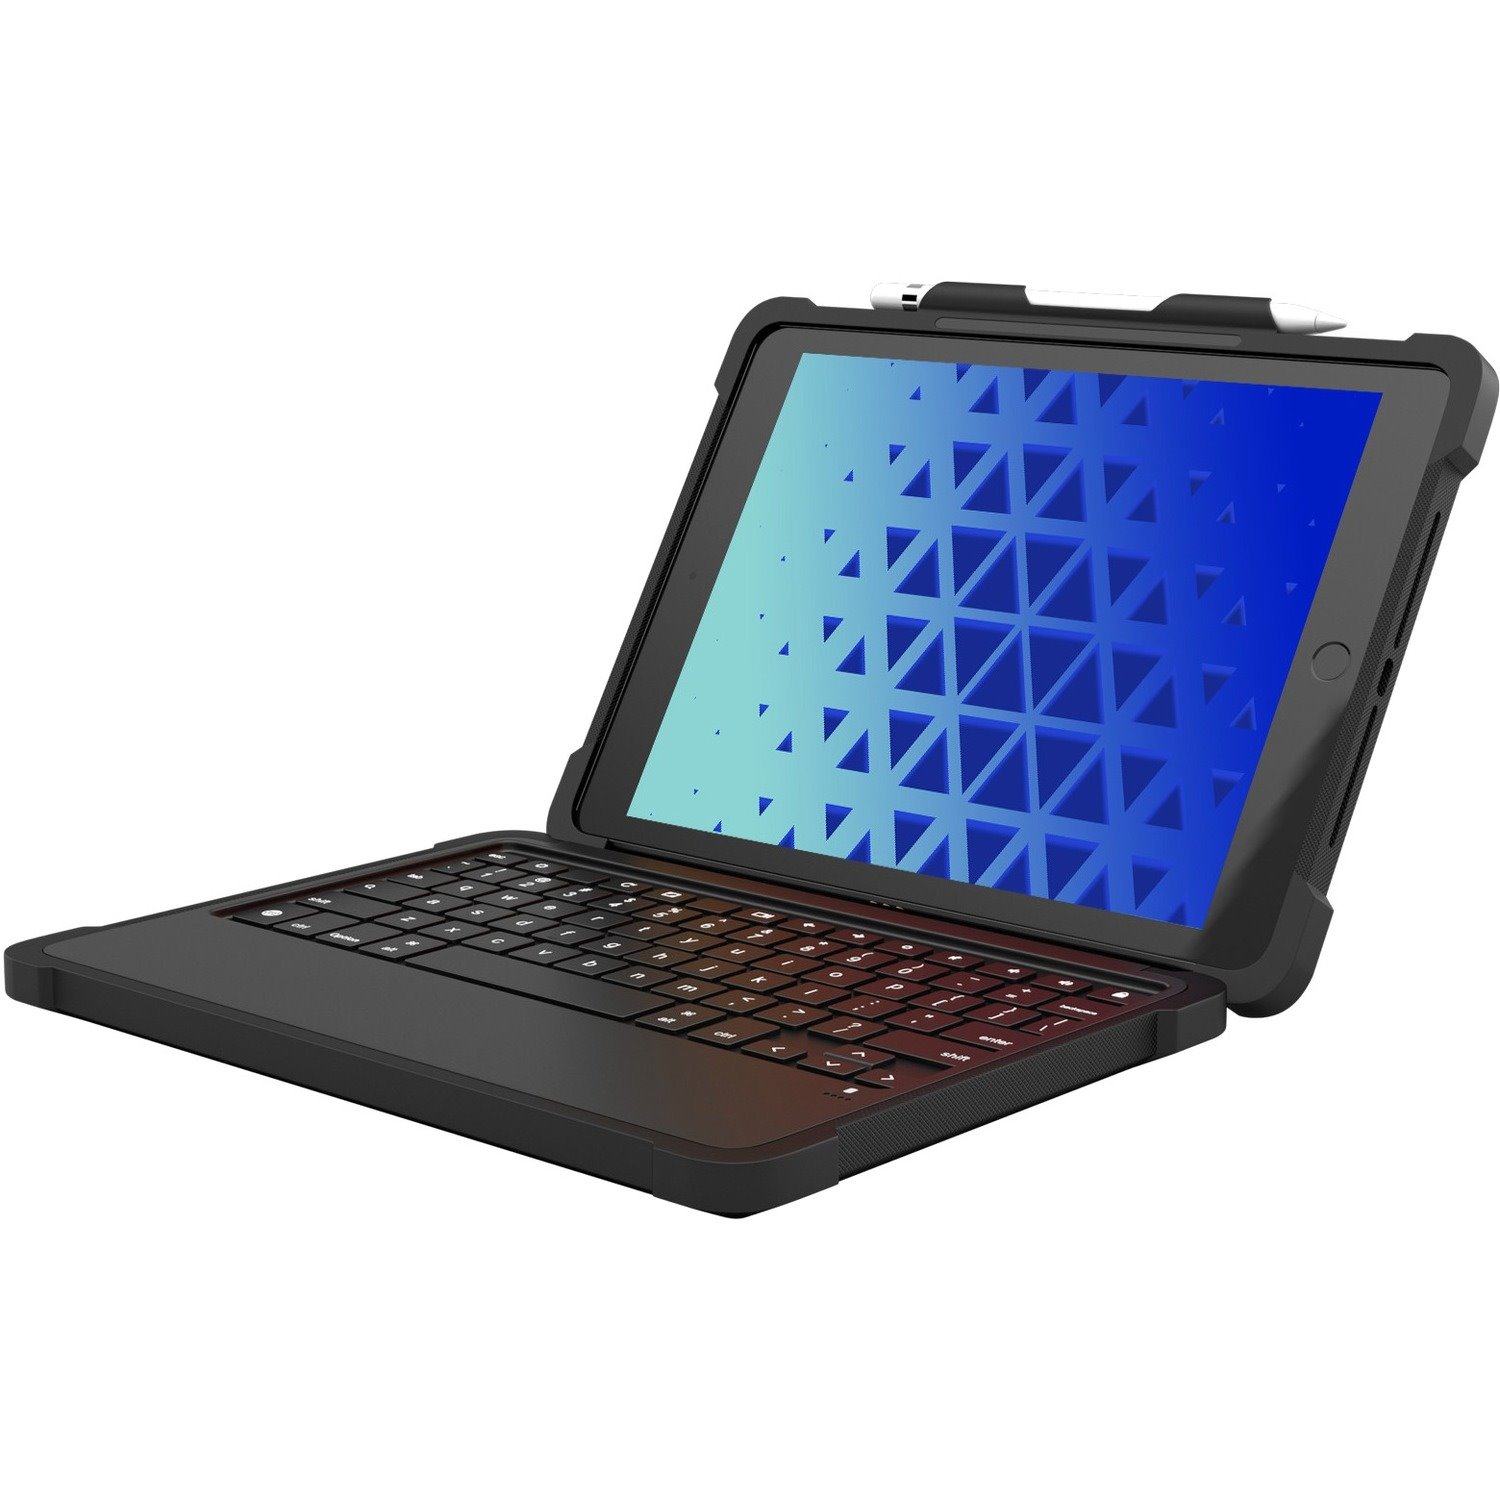 MAXCases Extreme KeyCase Rugged Keyboard/Cover Case for 10.2" Apple iPad (7th Generation), iPad (8th Generation), iPad (9th Generation) Tablet - Black